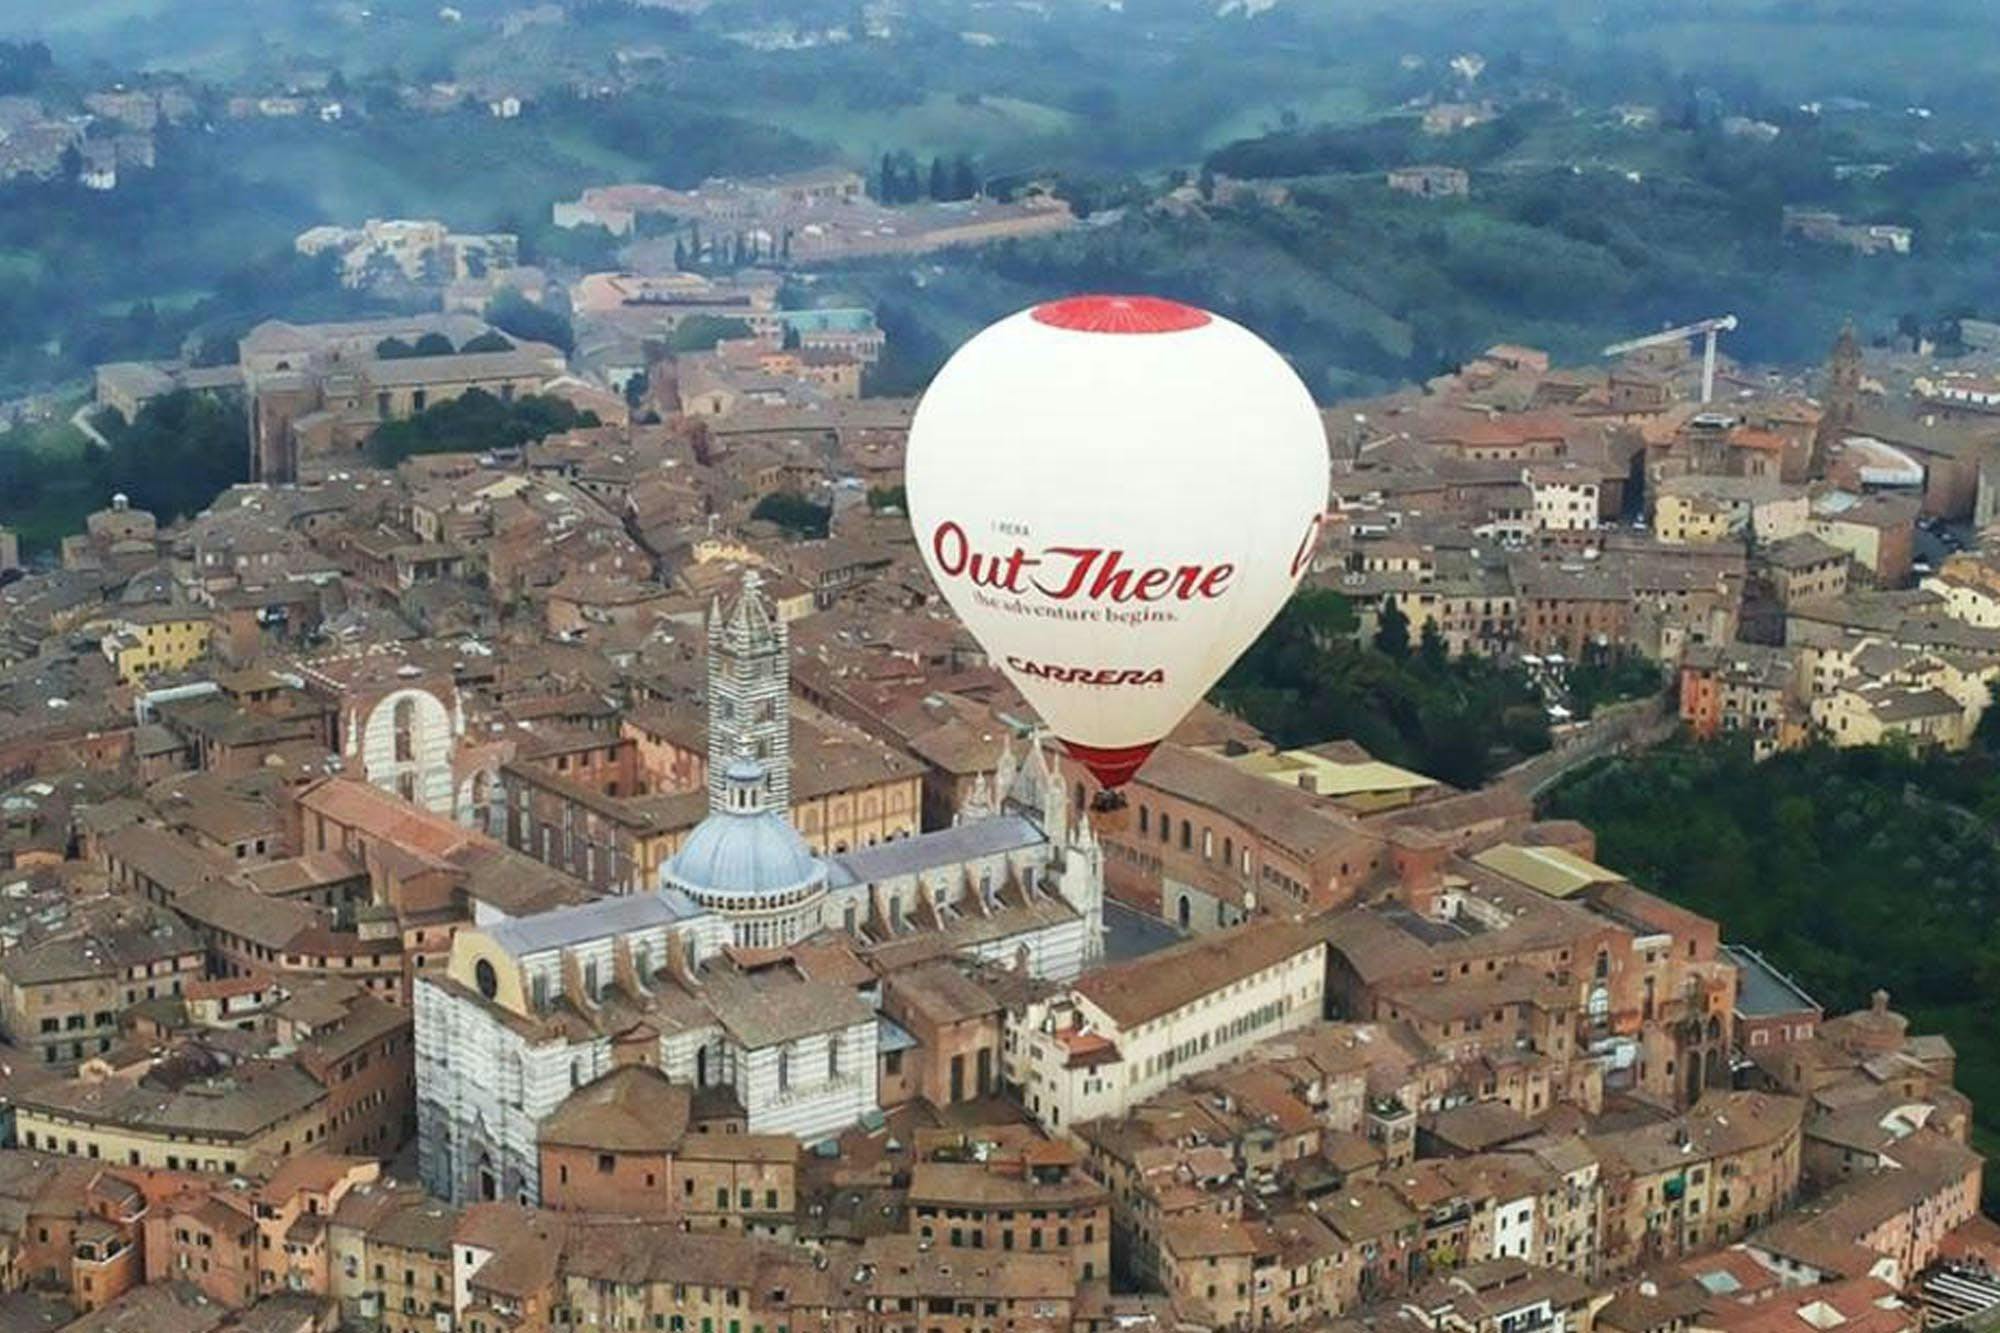 Hot air balloon rides over Siena in Tuscany